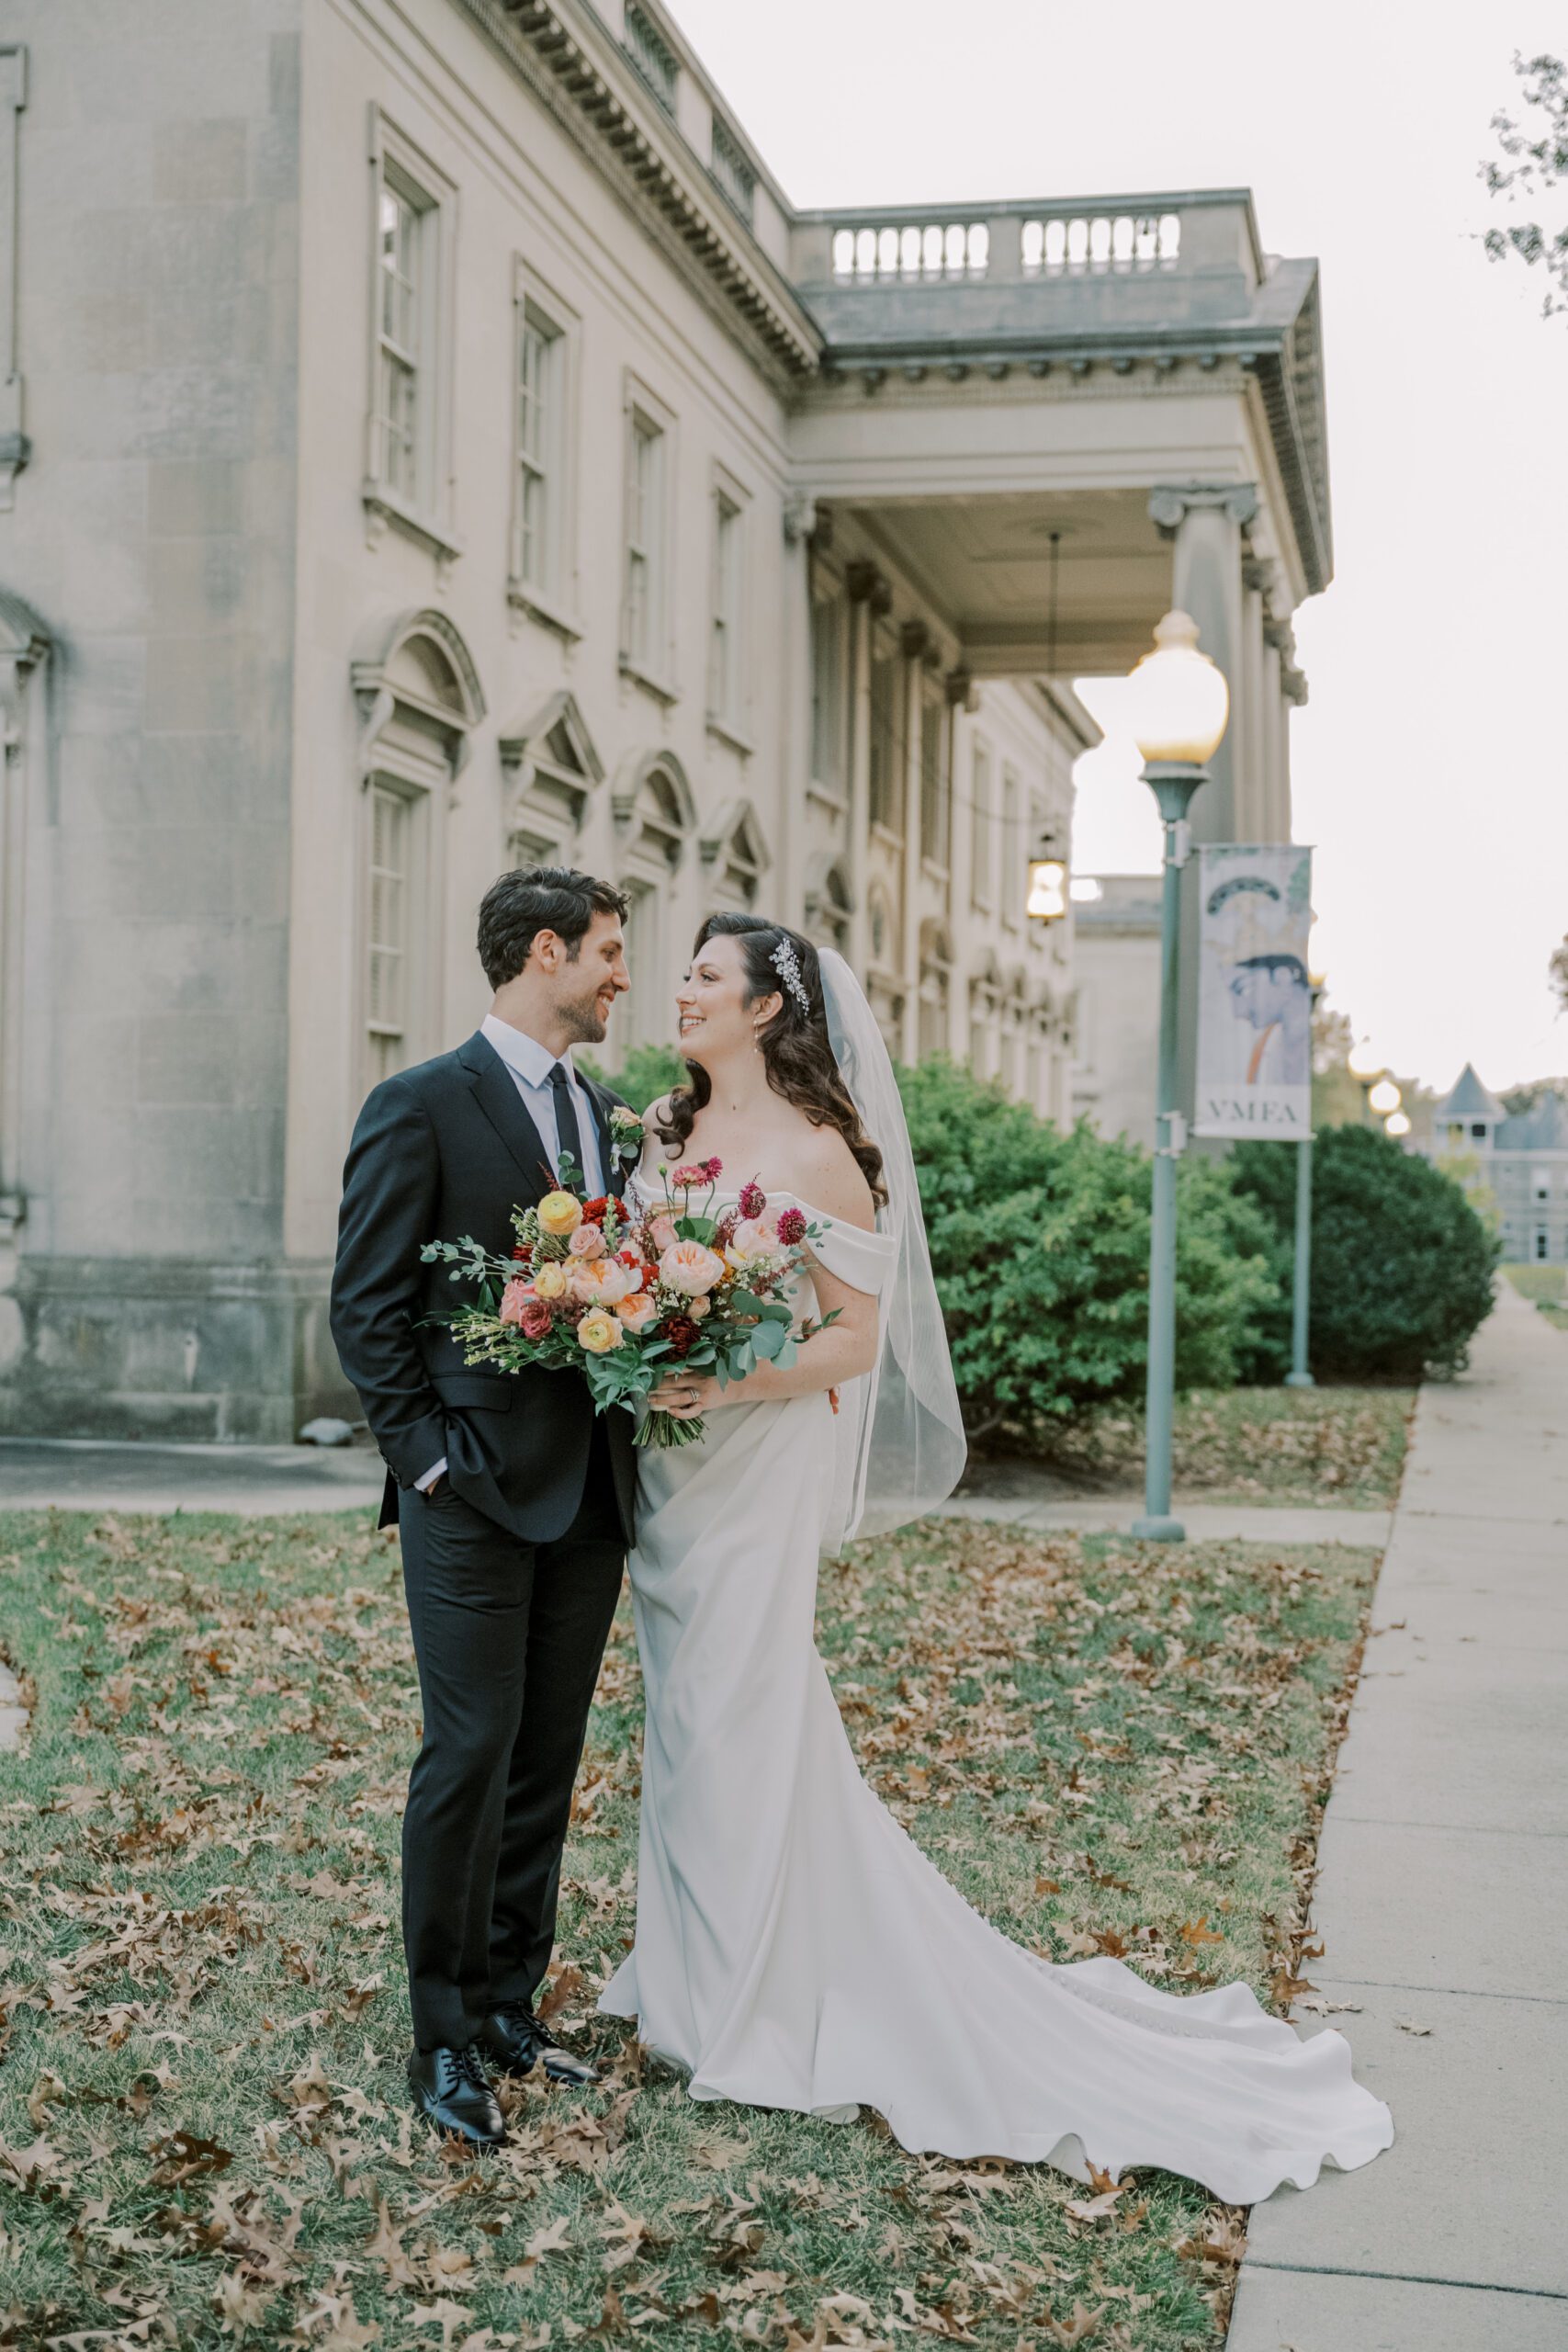 Outdoor full length photo of bride and groom smiling at one another while bride holds her bouquet in front of vmfa